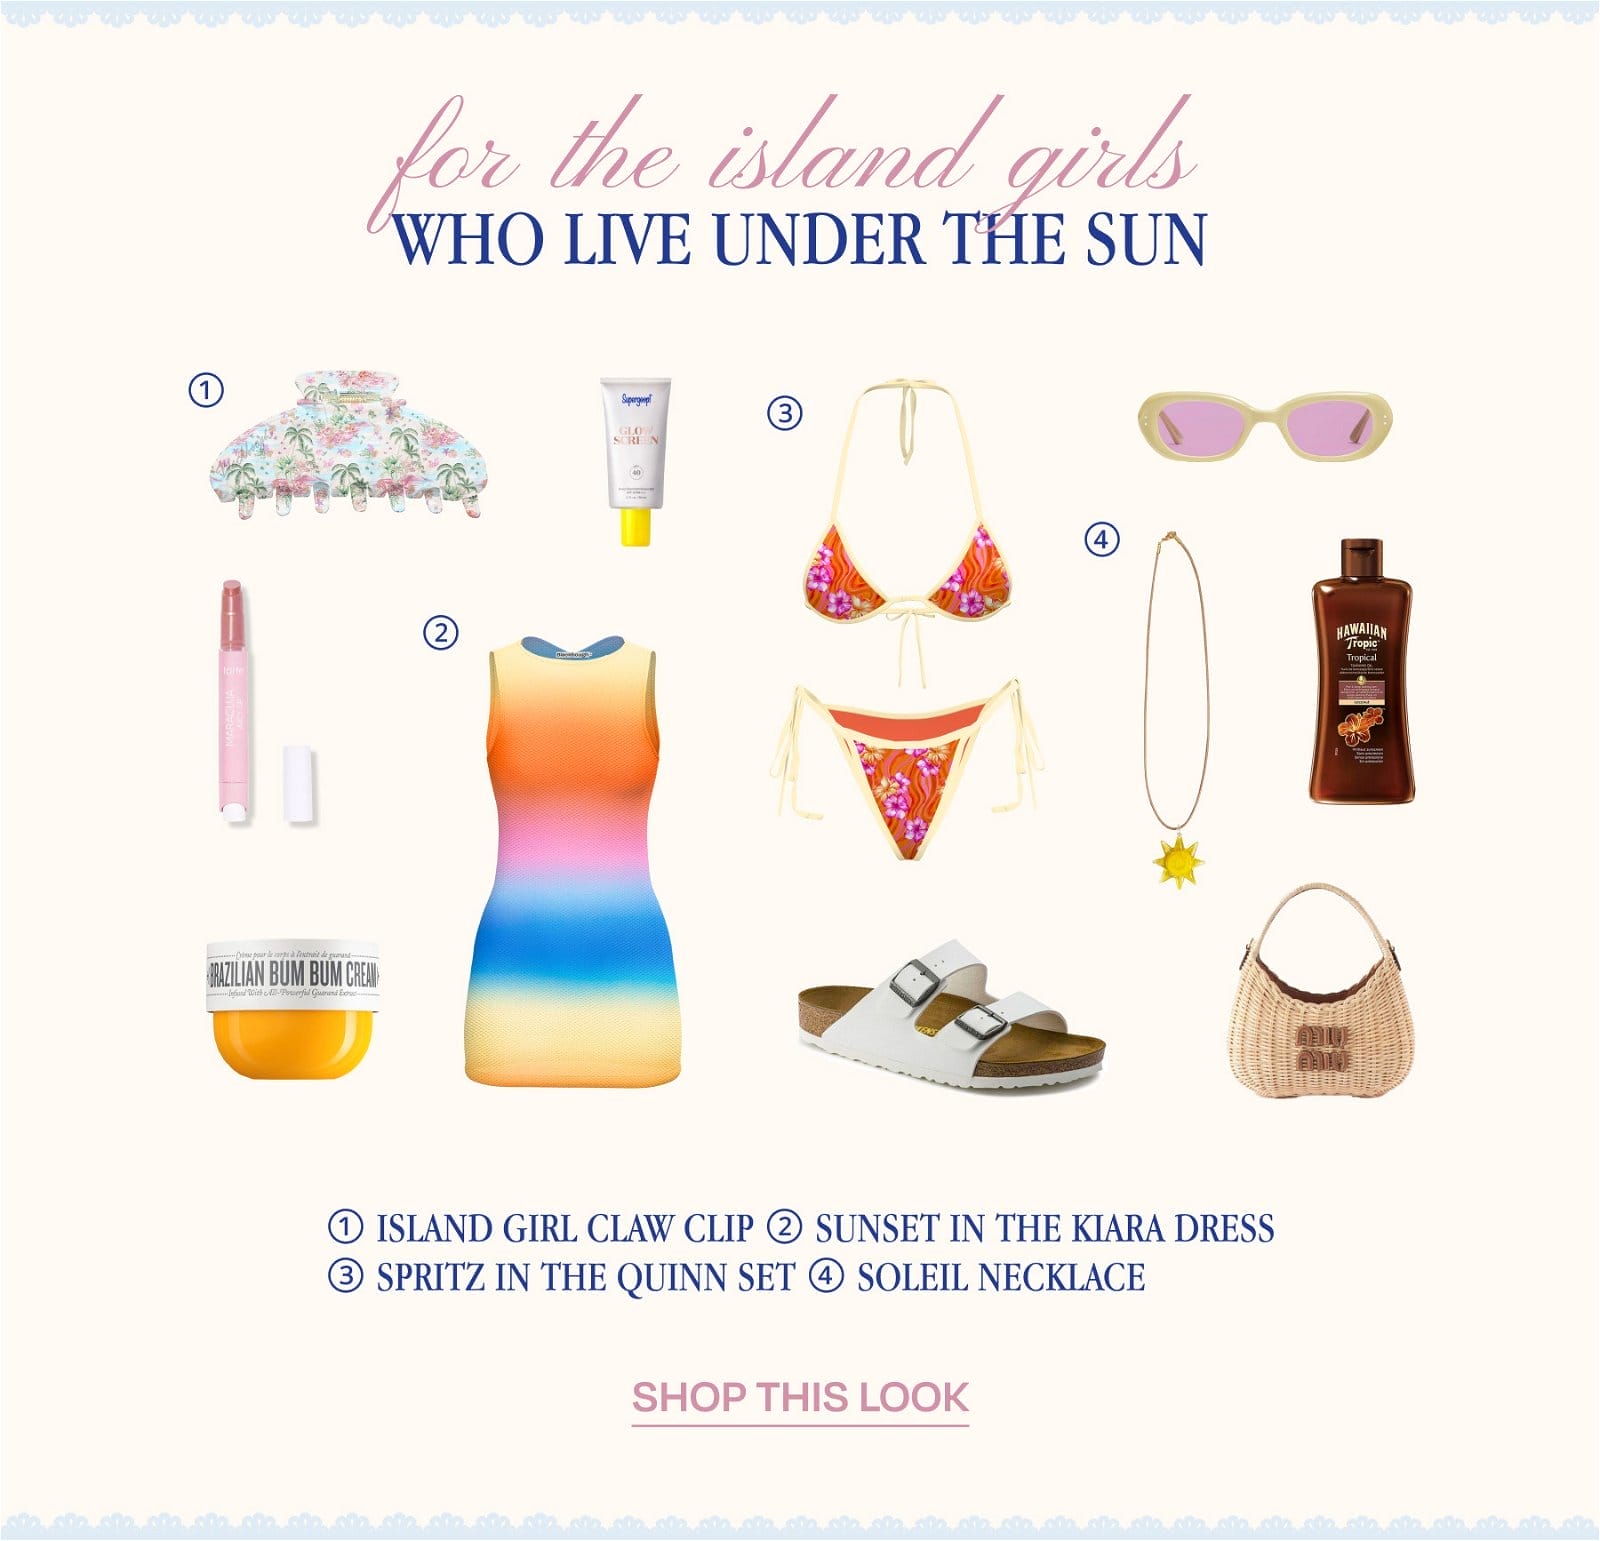 FOR THE ISLAND GIRLS WHO LIVE UNDER THE SUN